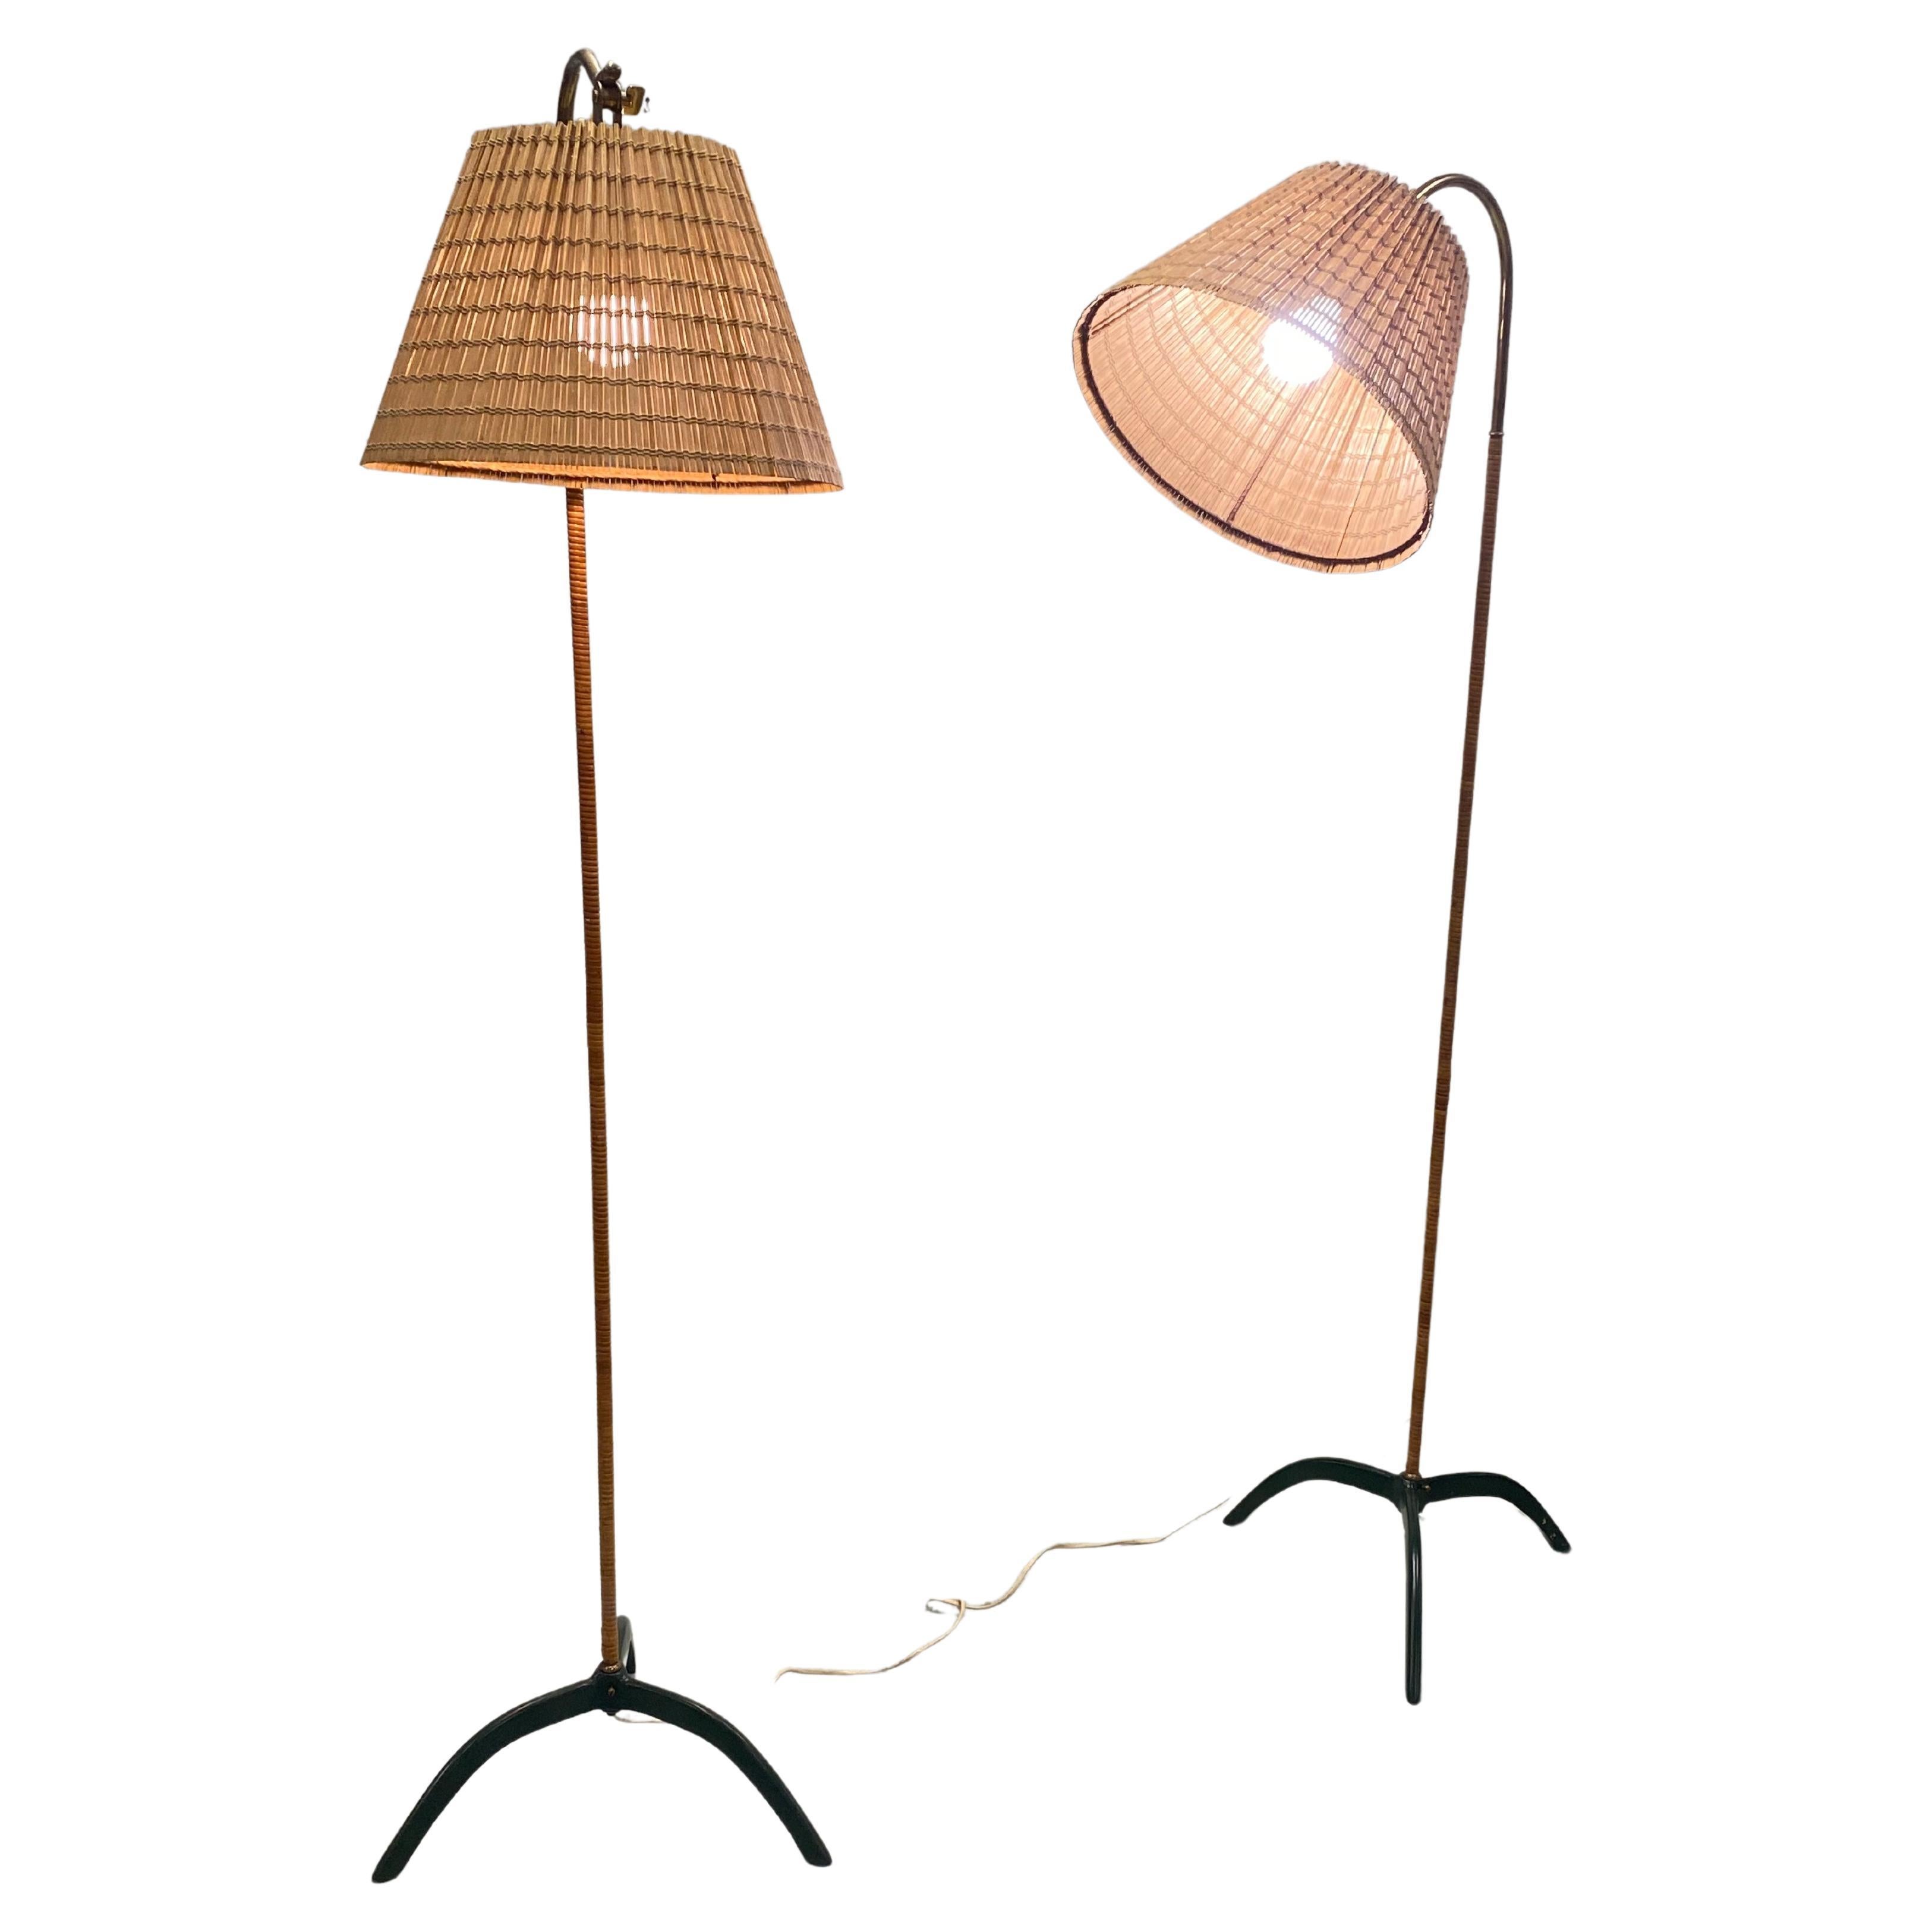 Paavo Tynell (1890-1973) original floor lamps model 9609, manufactured by Taito Oy in the 1950s.  A beautiful pair if floor lamps with a lacquered metal and rattan stem. All original parts excluding the beautiful renewed rattan shades. The bottom